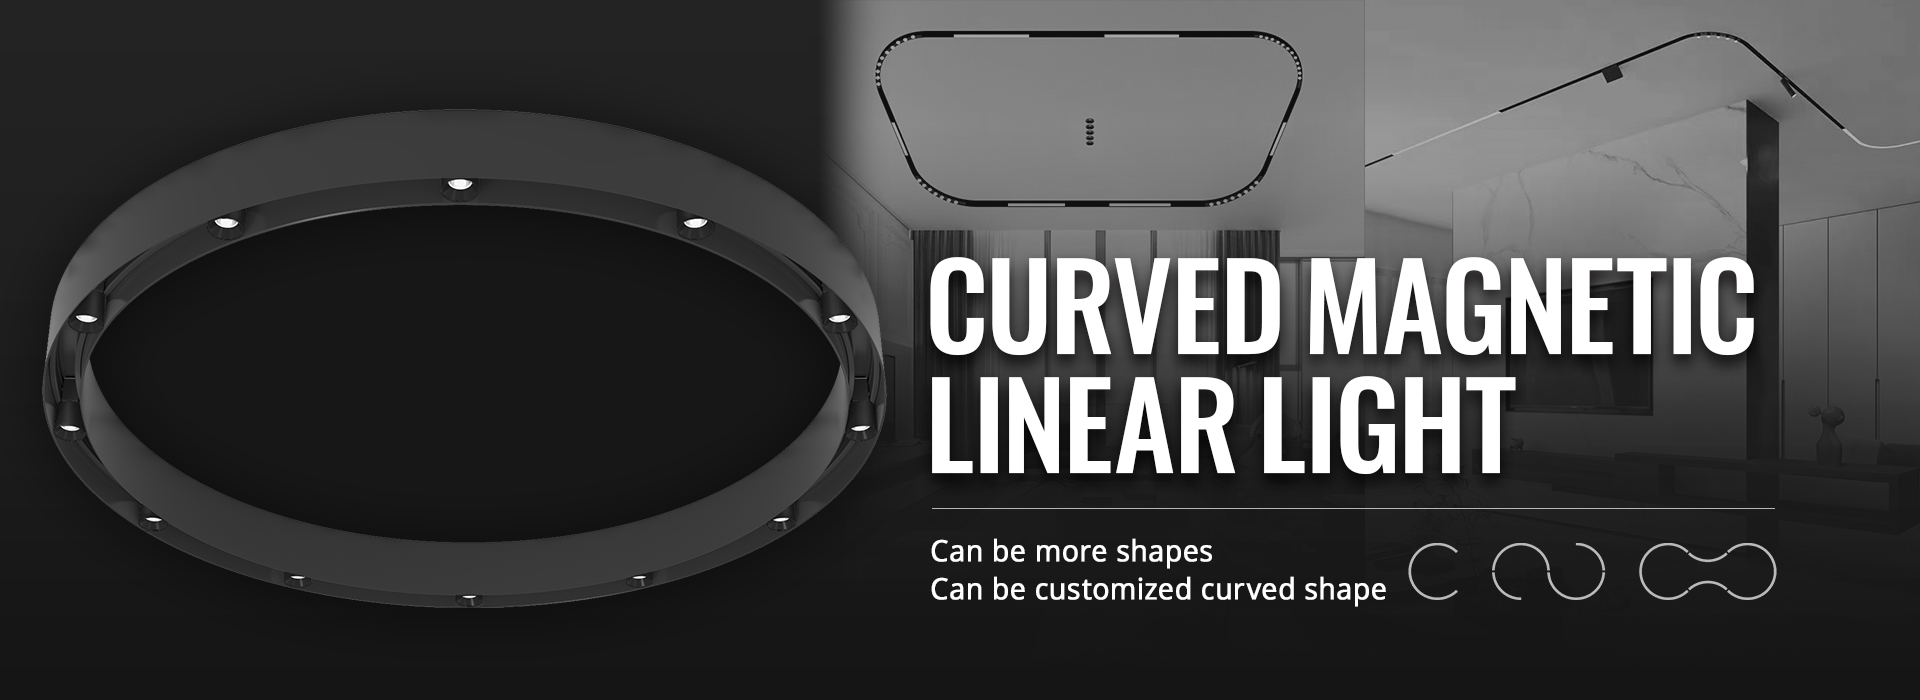 curved magnetic track light